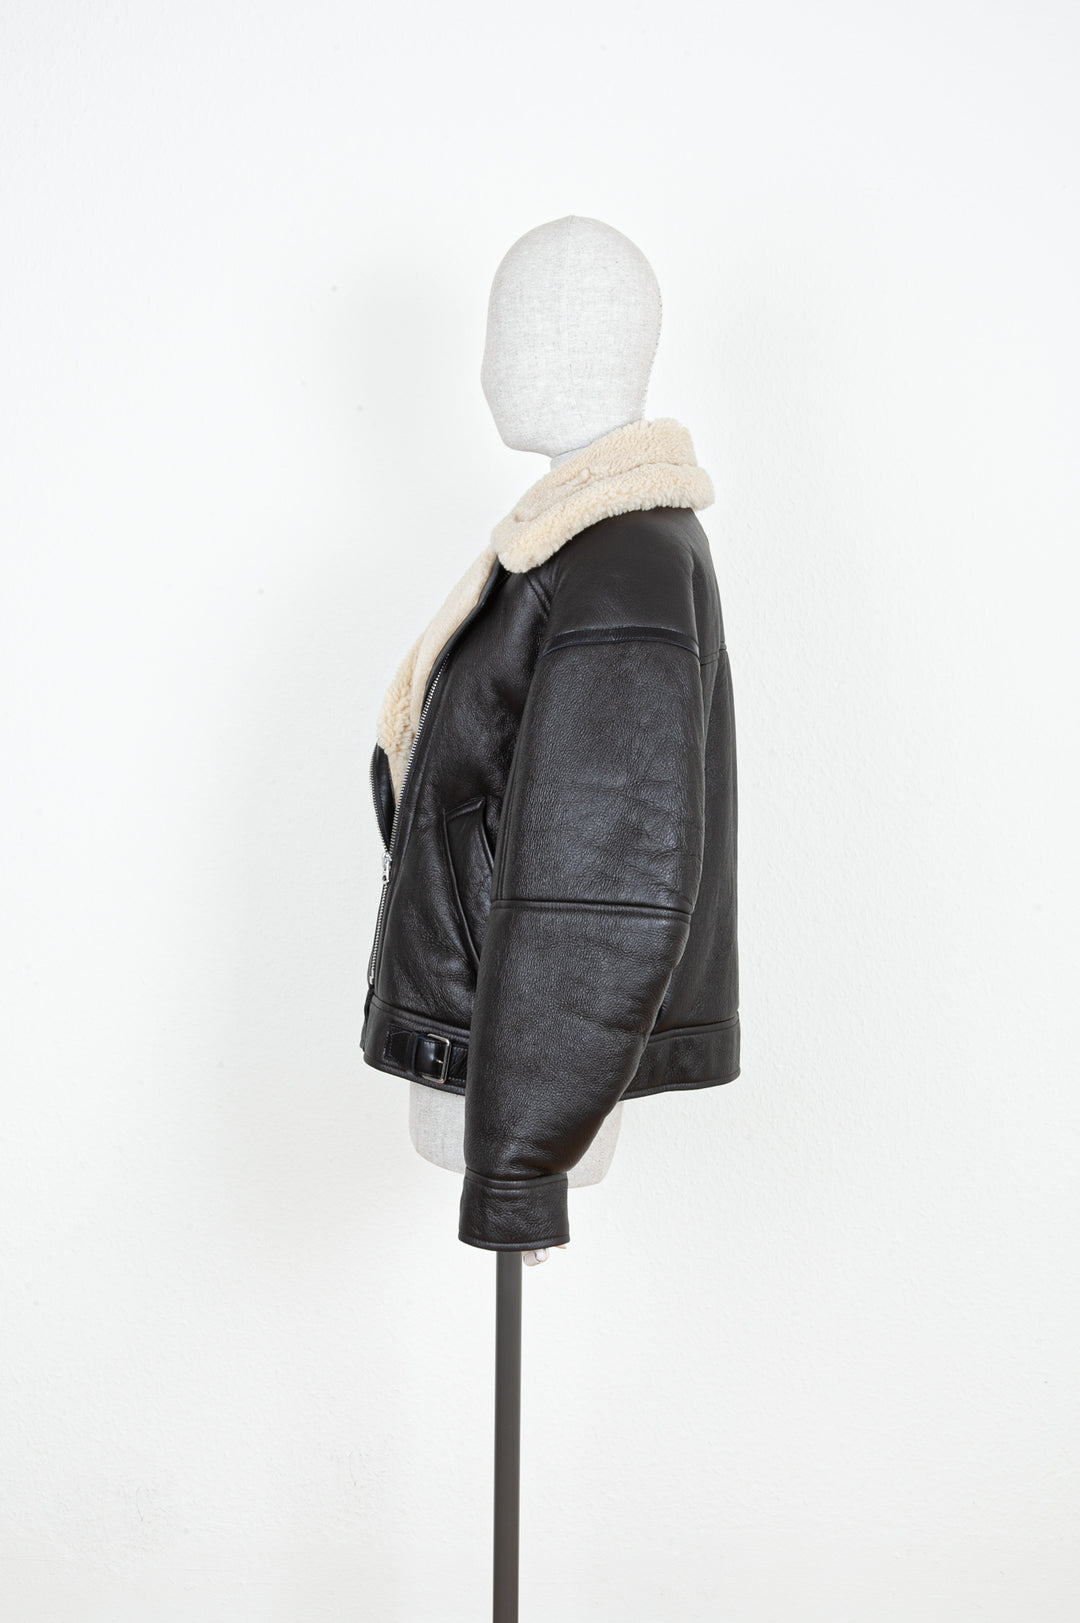 ACNE STUDIOS Leather Jacket Shearling